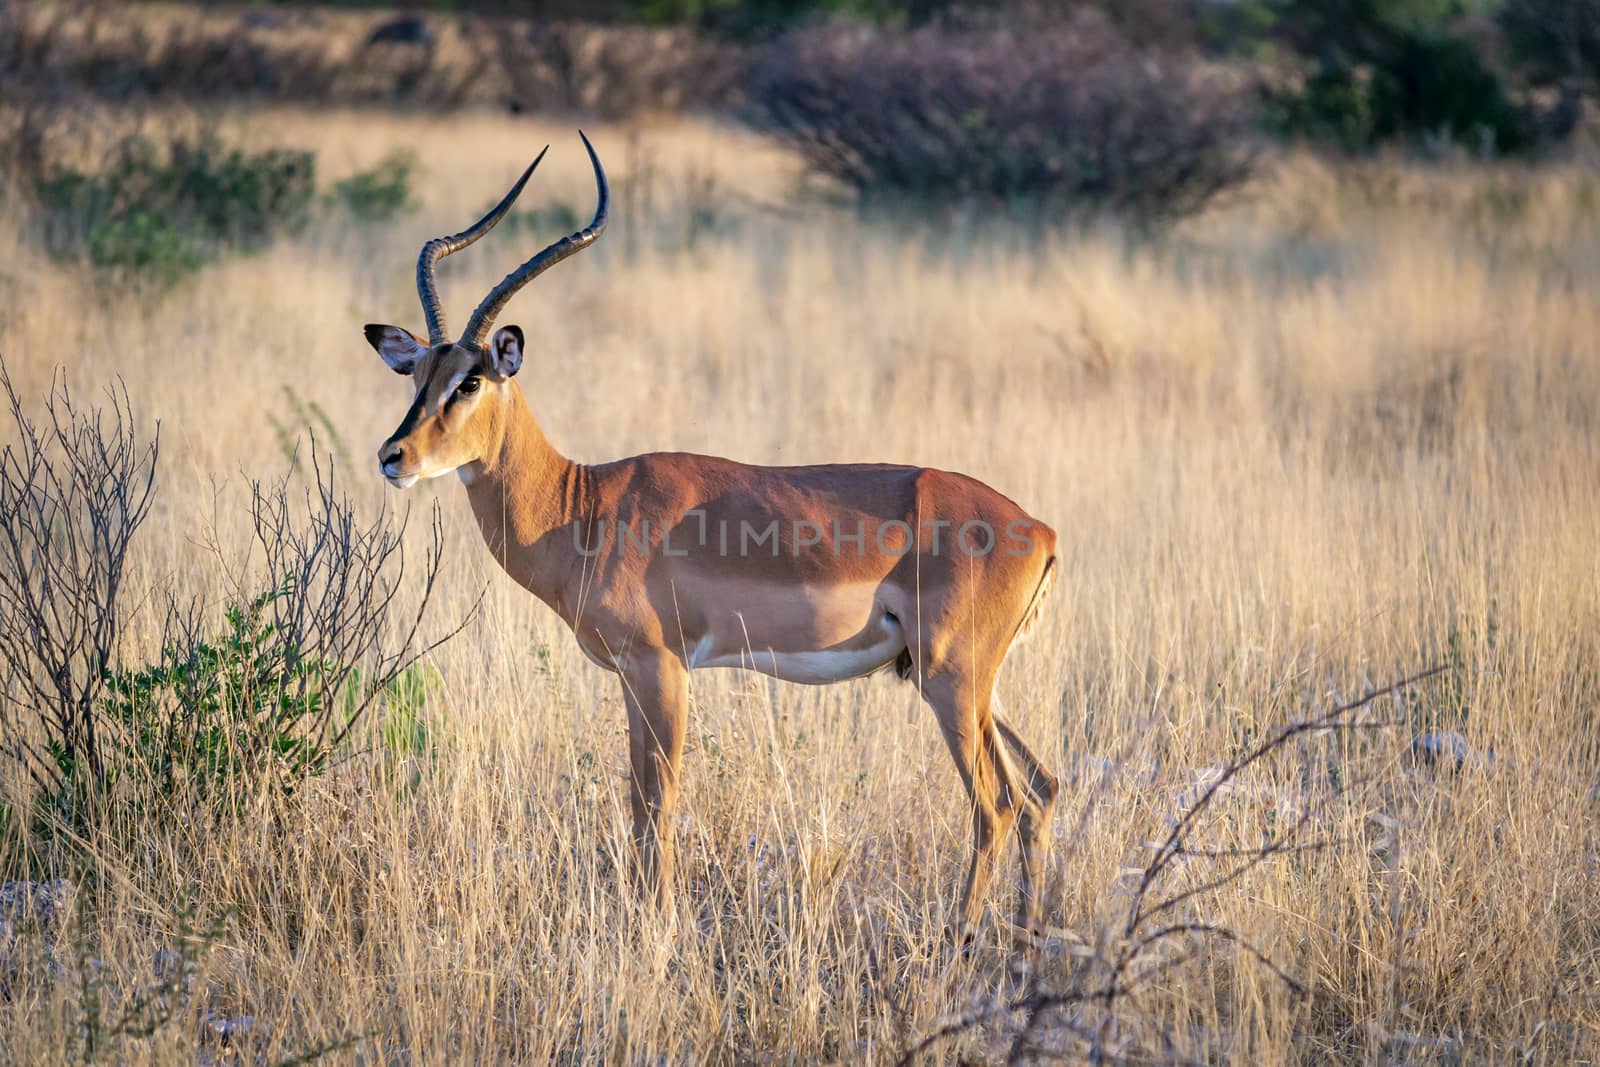 Impala antelope isolated in the African savannah of Etosha national park Namibia during a safari by kb79